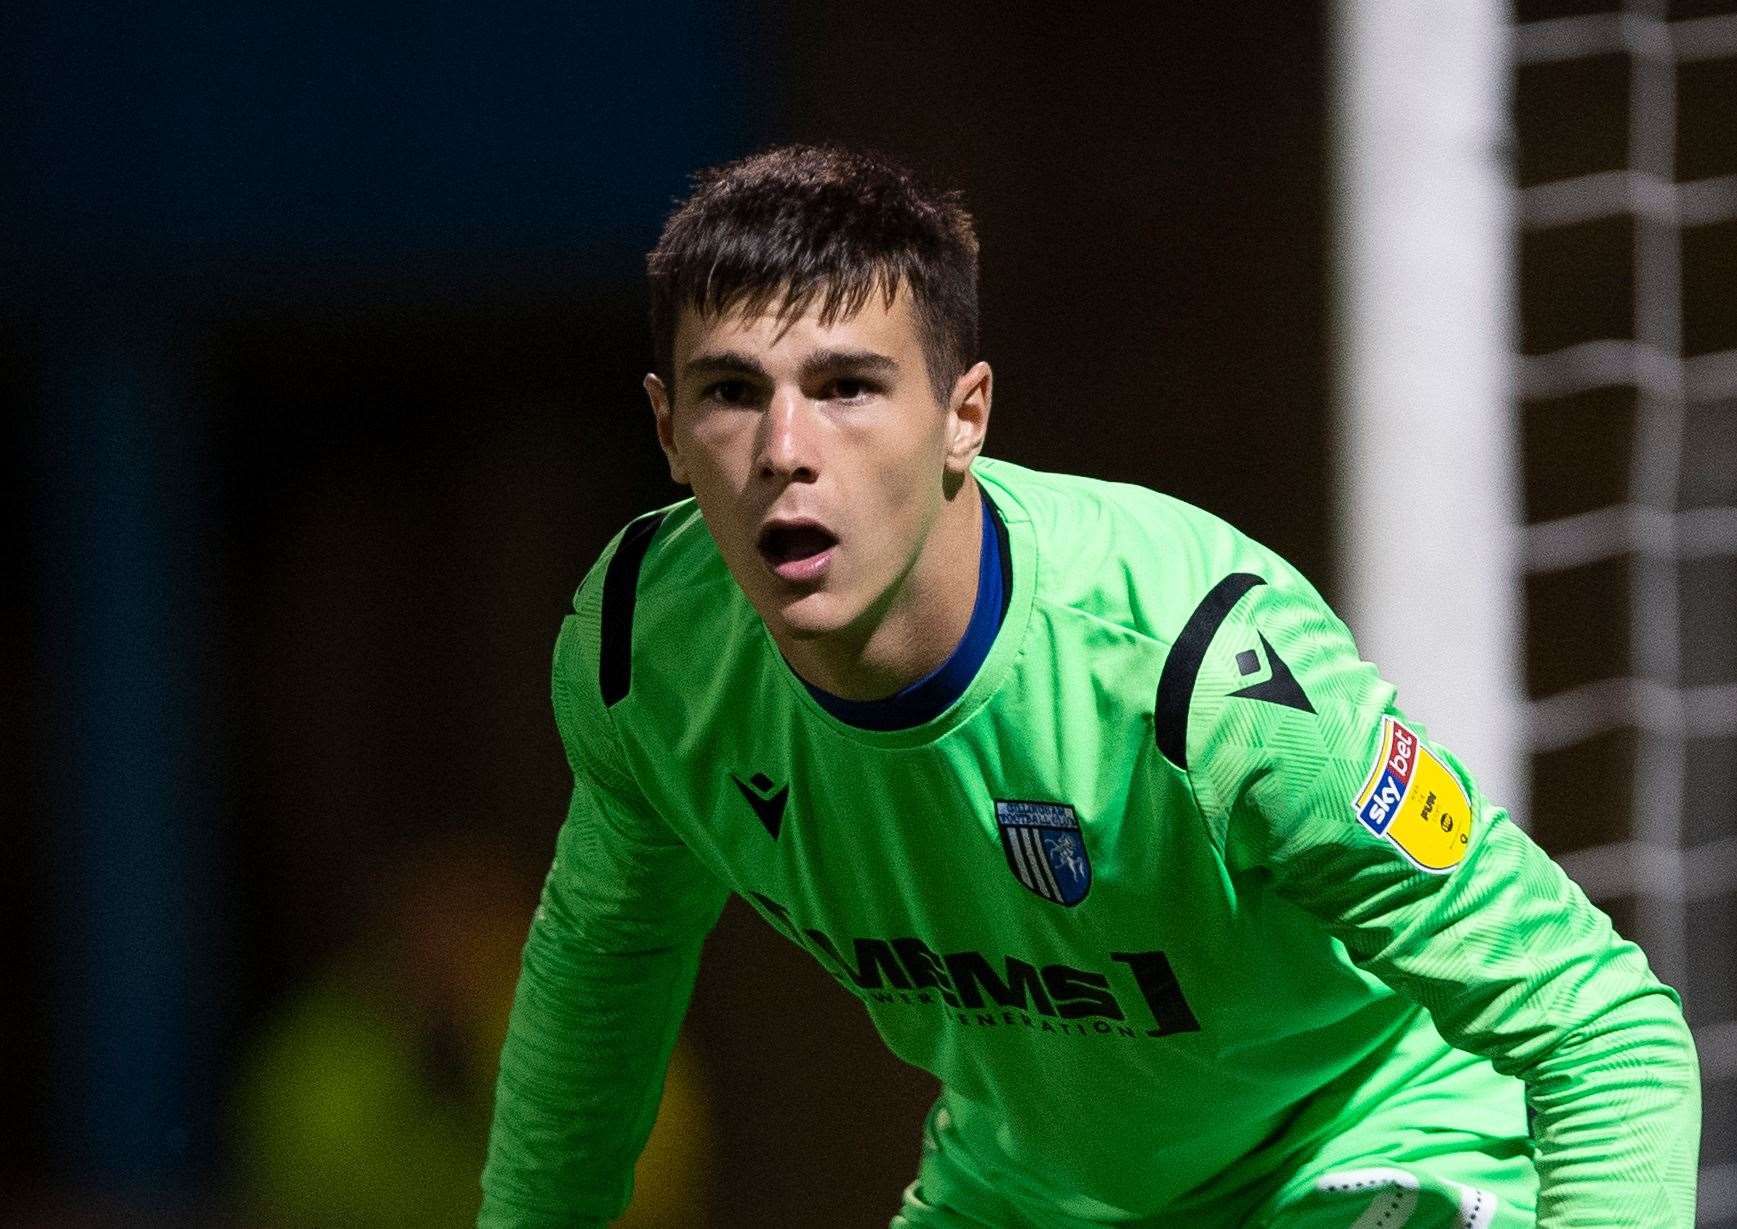 Joe Walsh made a crucial penalty save for the Gills in their Kent Senior Cup game at Bromley